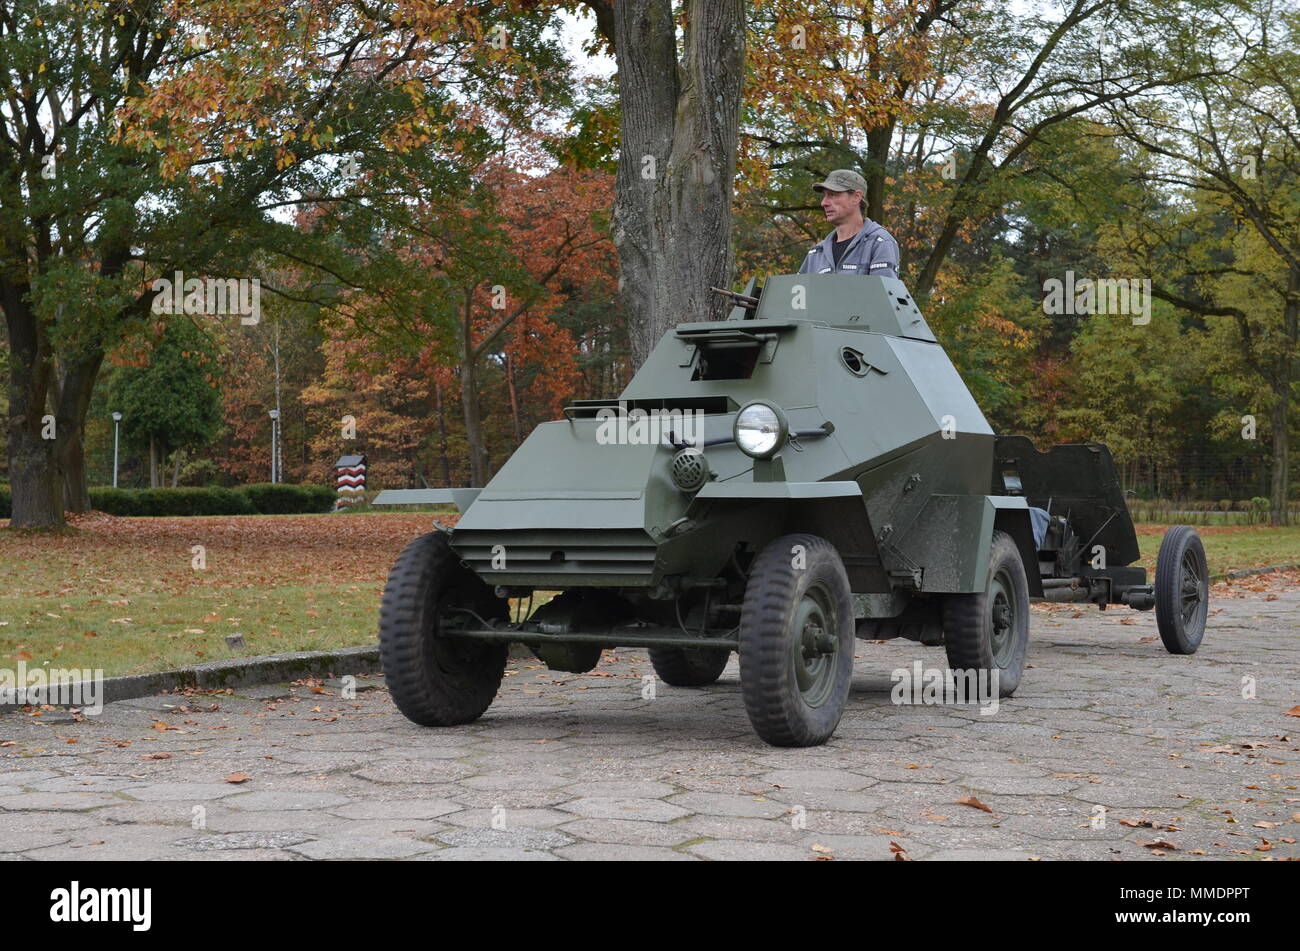 ZAGAN, Poland — A Polish BA-64 with an attached 45 mm anti-tank gun model 1937 arrives at a display of Army equipment for the Museum of Prisoner of War Camps, Zagan, Poland, Oct. 21. The museum event seeks to educate visitors about the Stalag Luft III Prisoner Camp, World War II, and Polish-American relations. The museum invites 1st Infantry Division Soldiers and members of the Historical Association Big Red One Poland to participate in educating the public. The 2nd Armored Brigade Combat Team, 1st Infantry Division, is currently in Europe to support Atlantic Resolve. Atlantic Resolve is a U.S Stock Photo